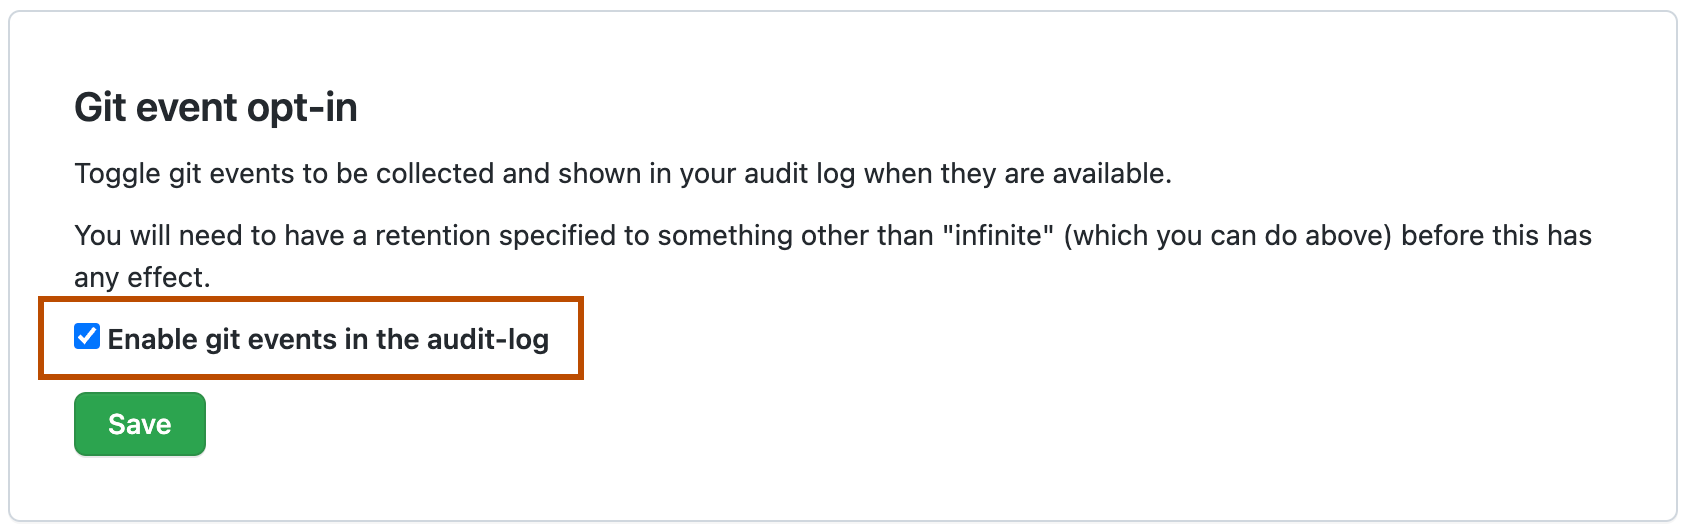 Screenshot of the checkbox to enable Git events in the audit log